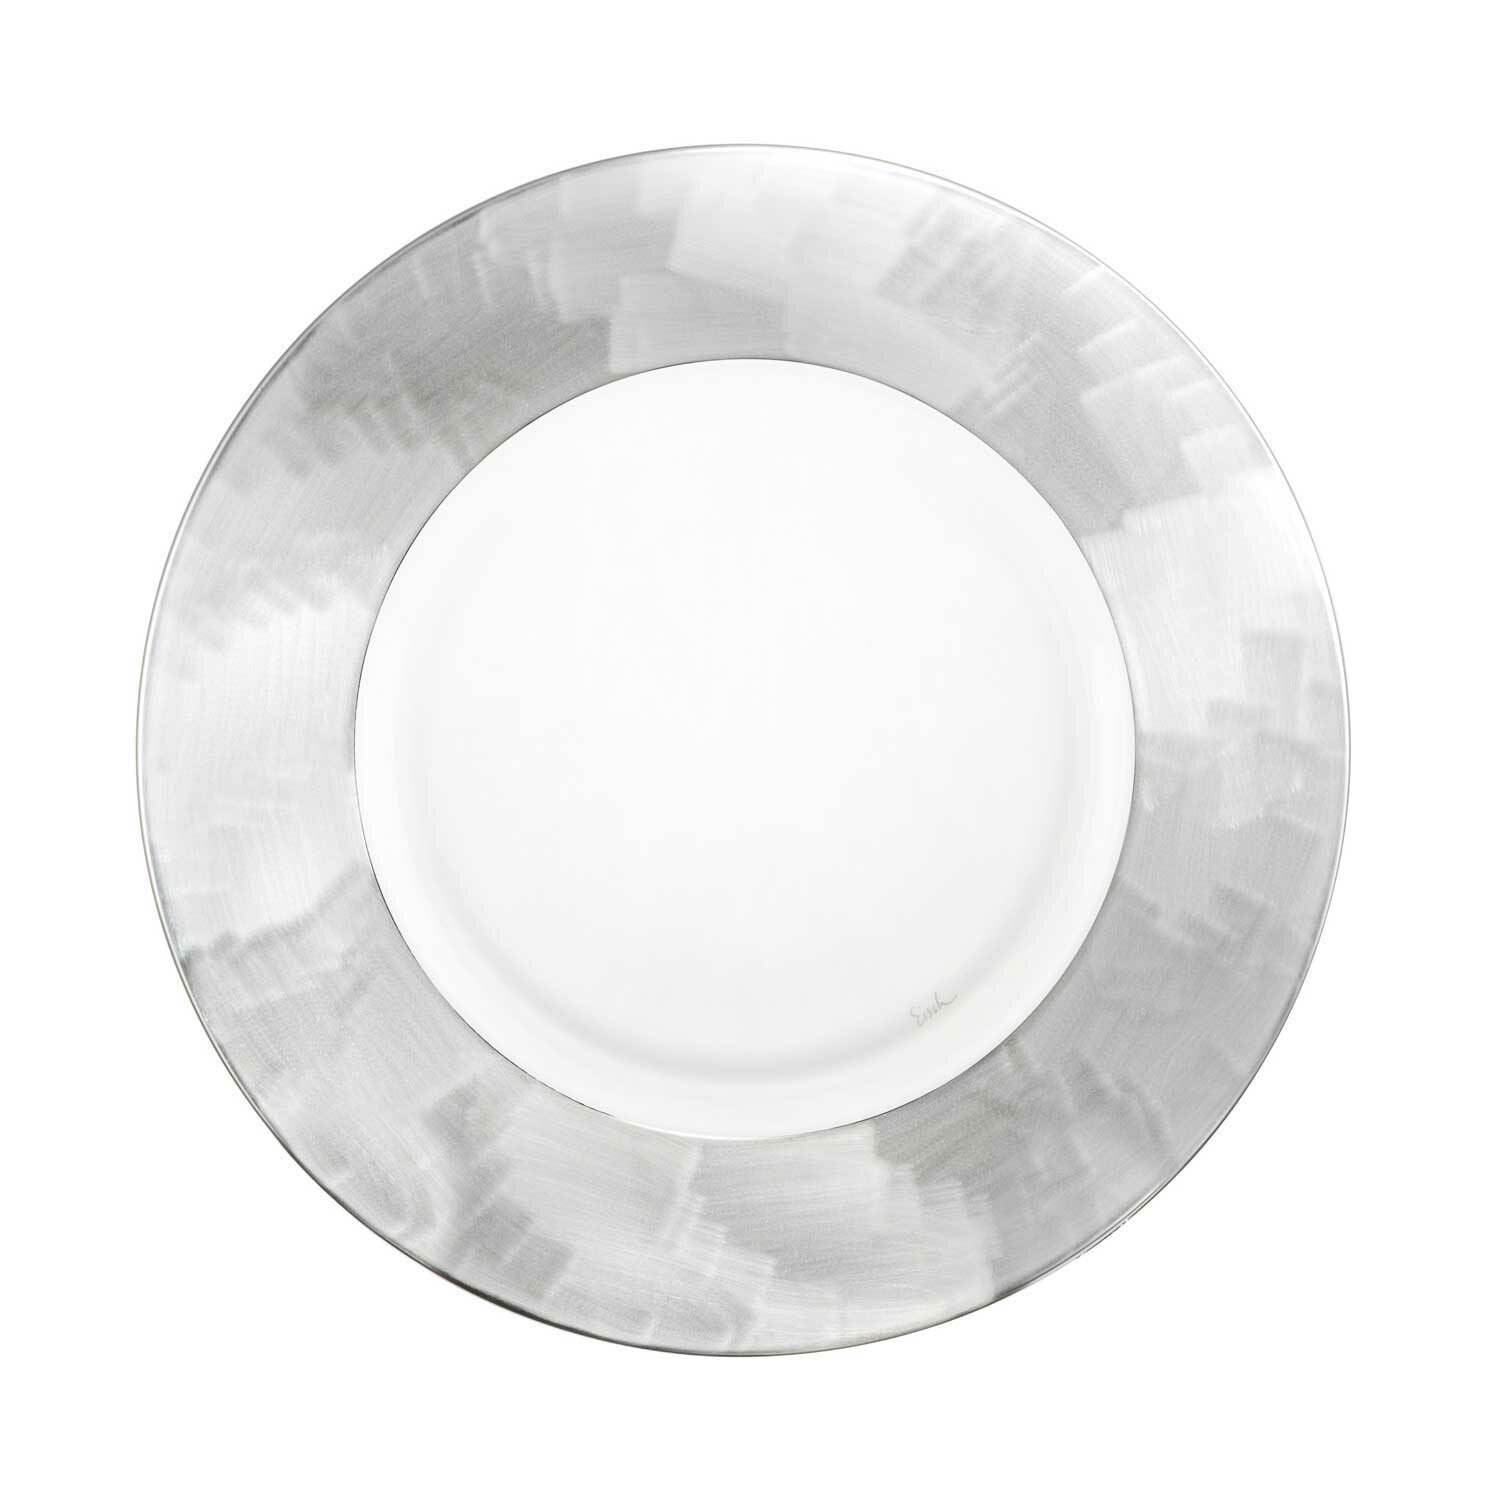 PURO crystal glass plate 22 cm with real silver